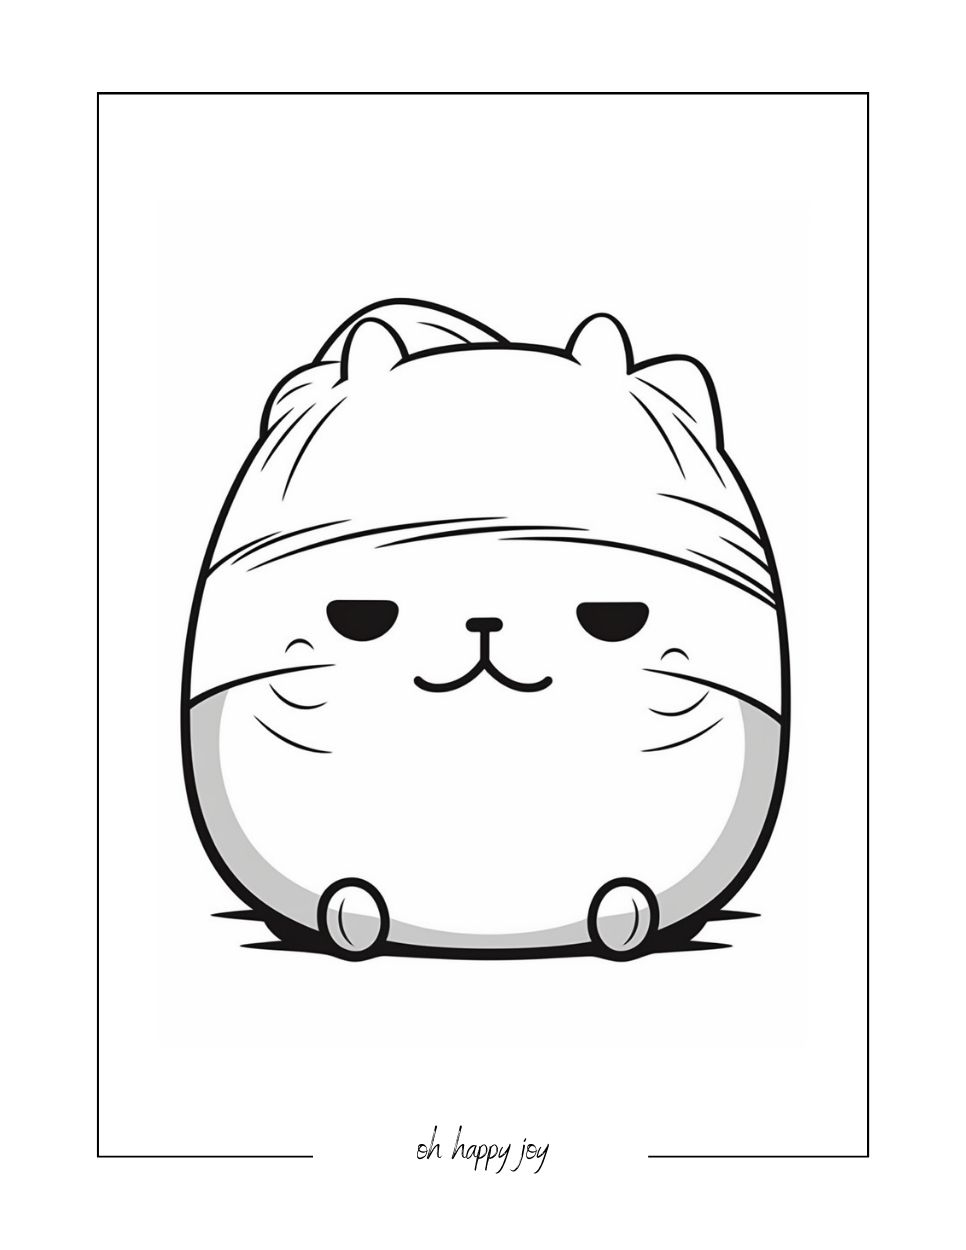 Cute squishmallow coloring page